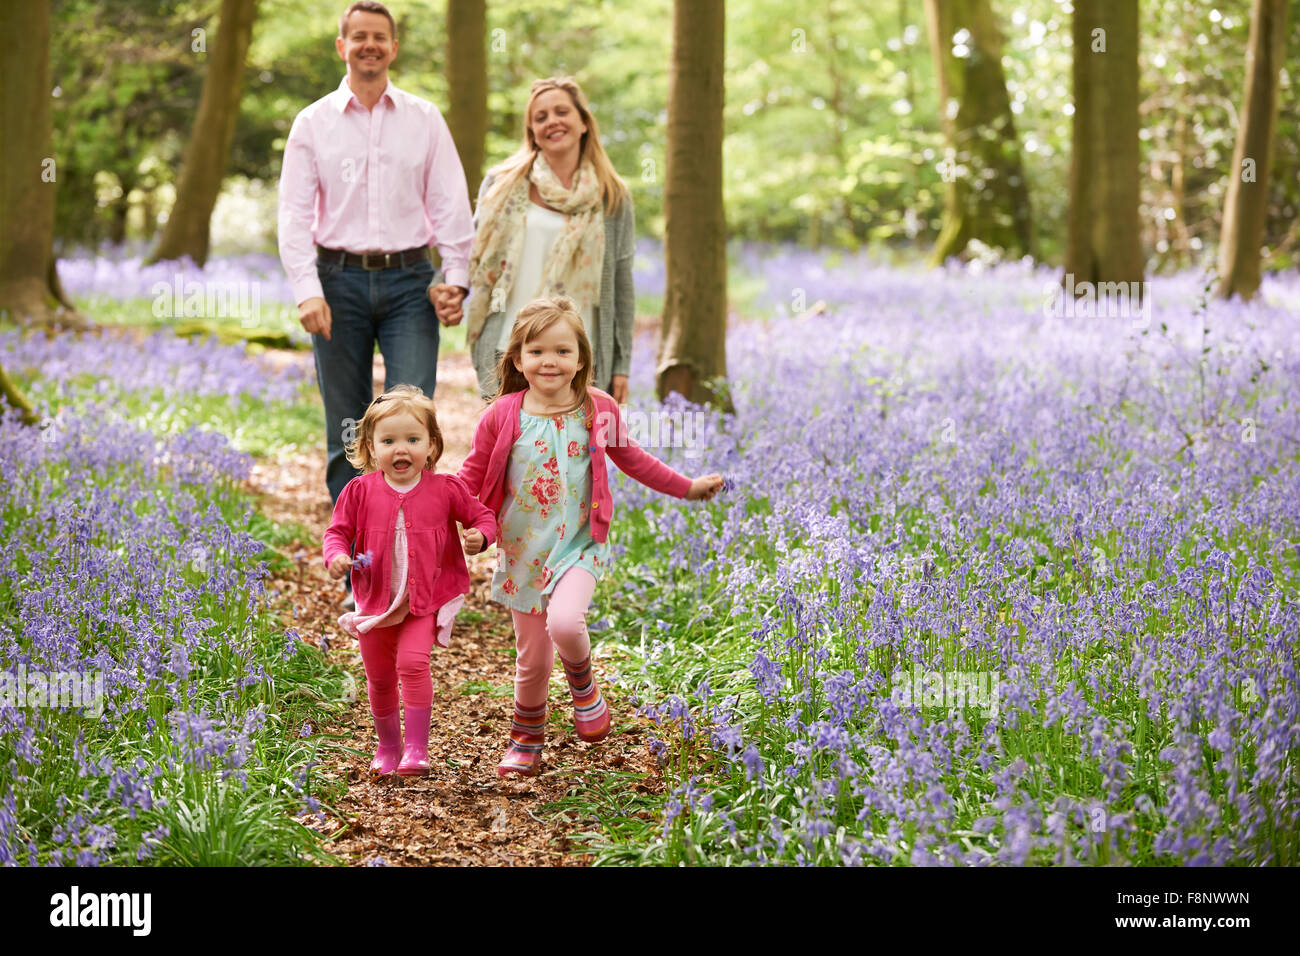 Family Walking Through Bluebell Woods Together Stock Photo